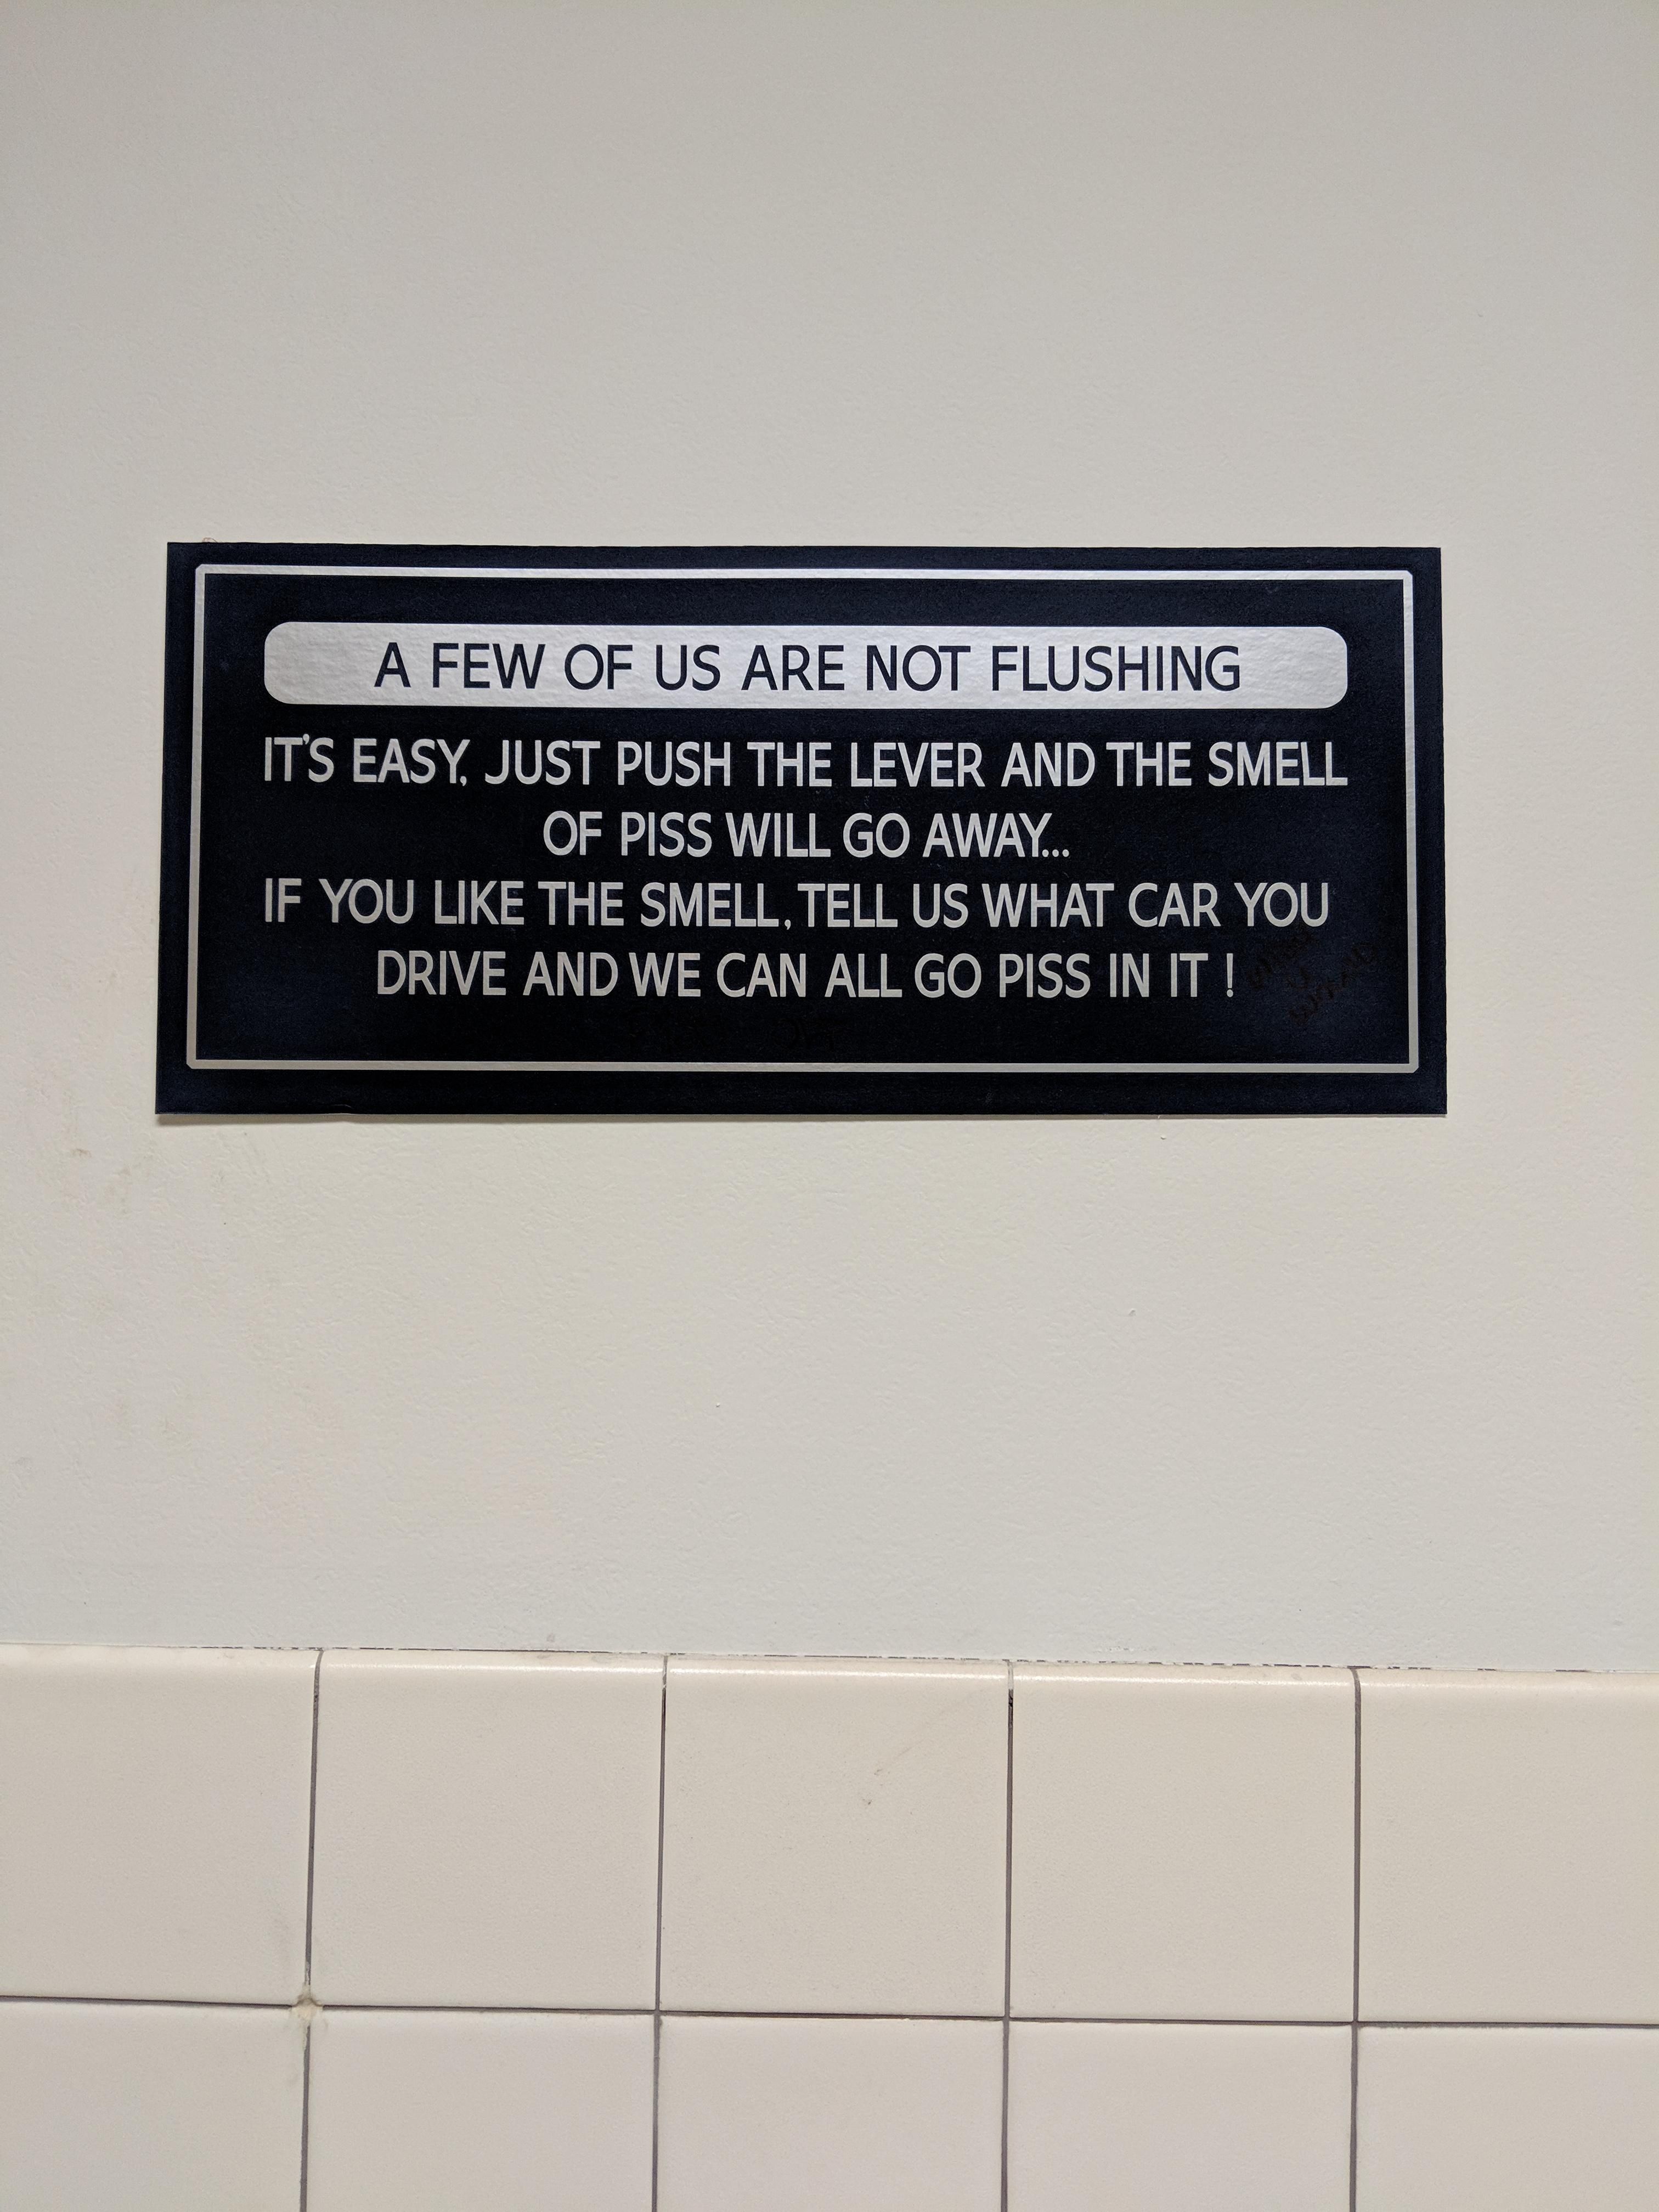 This sign in the bathroom at work.